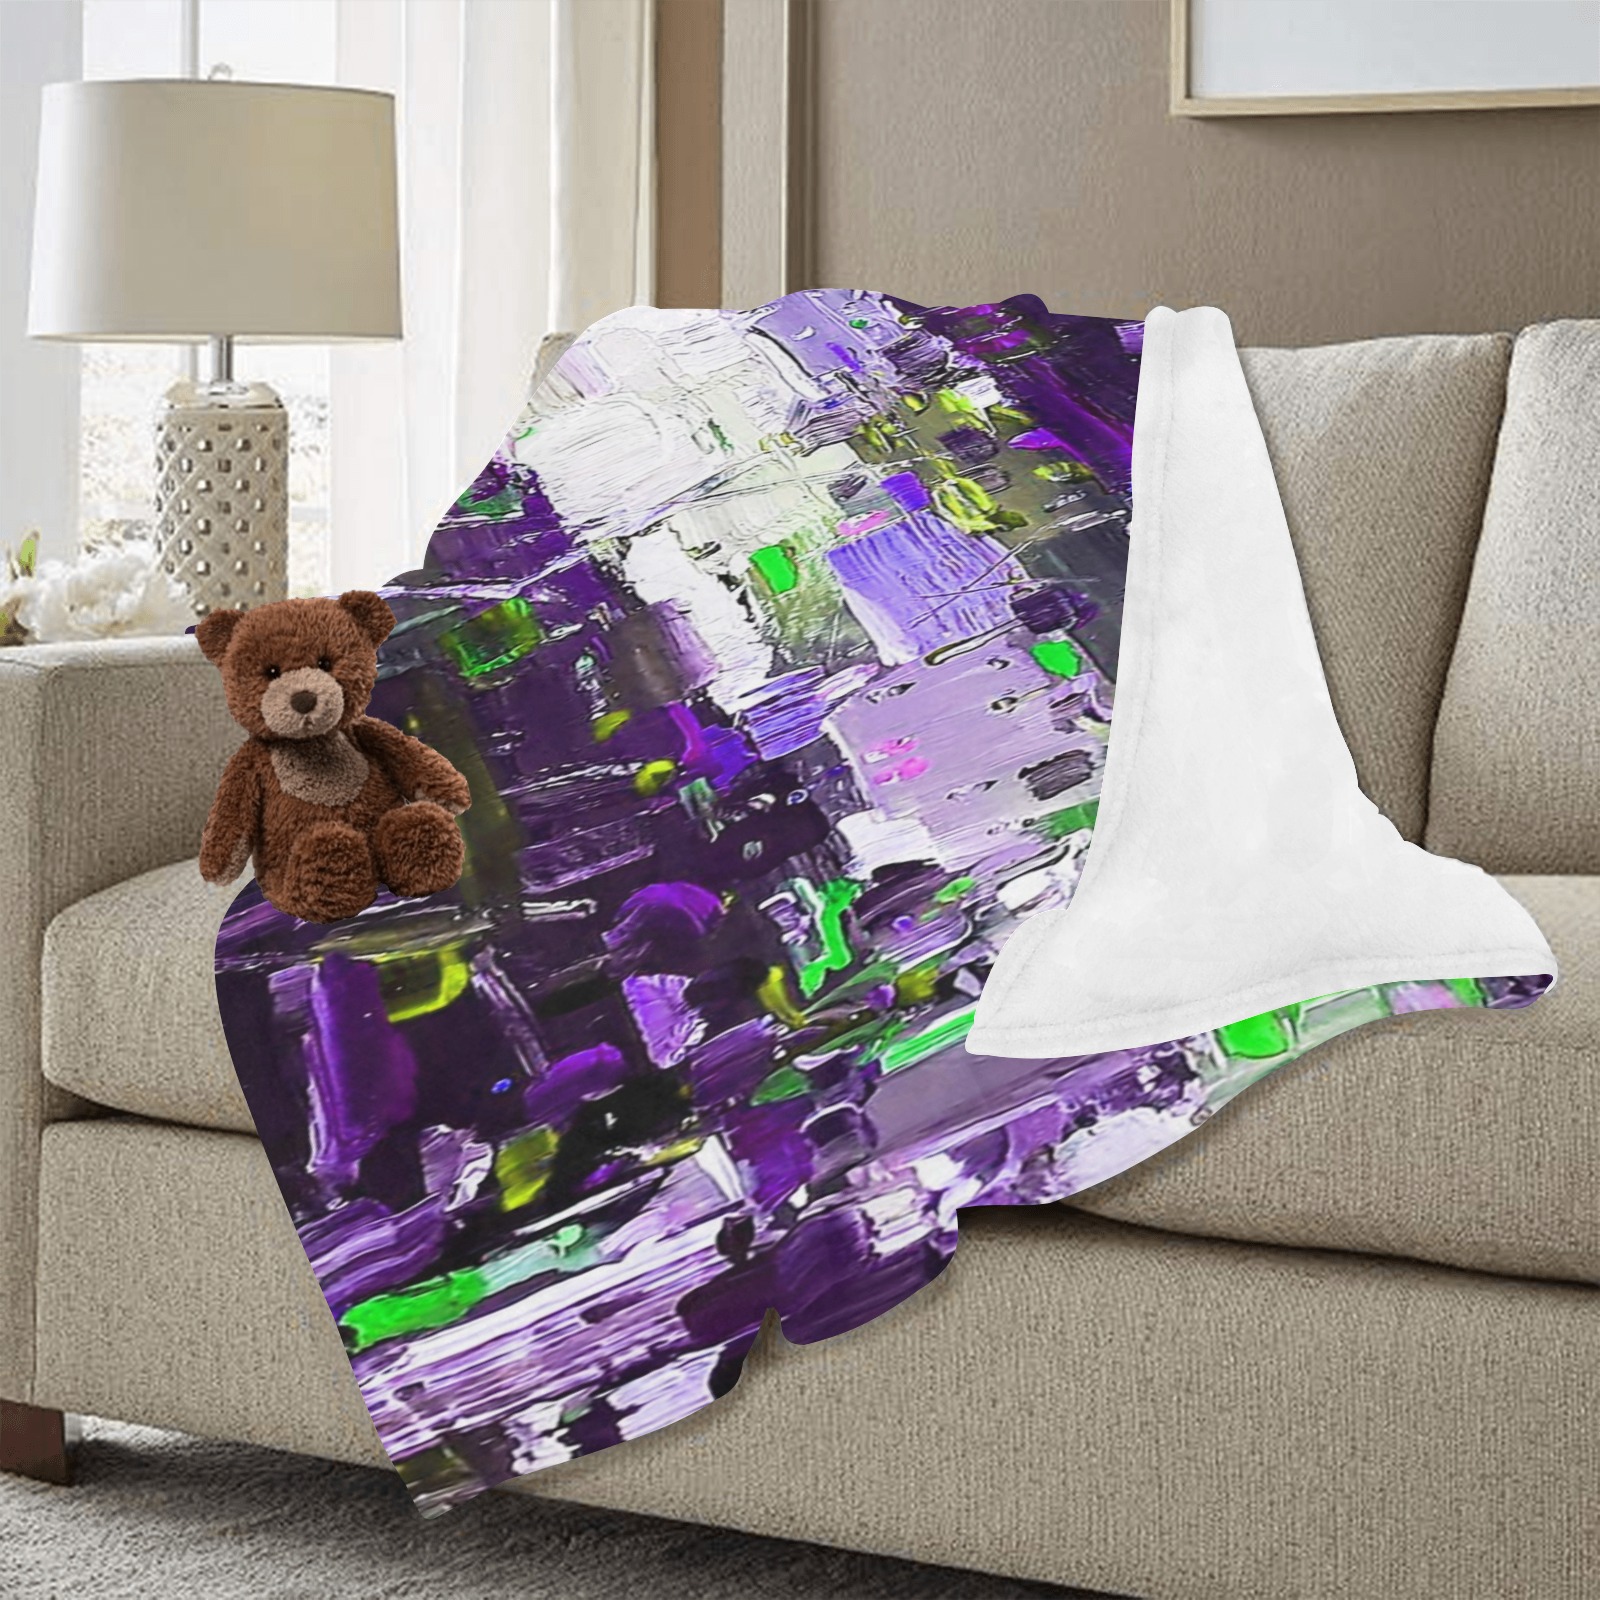 hacking the universe 606a2b Ultra-Soft Micro Fleece Blanket 60"x80" (Thick)